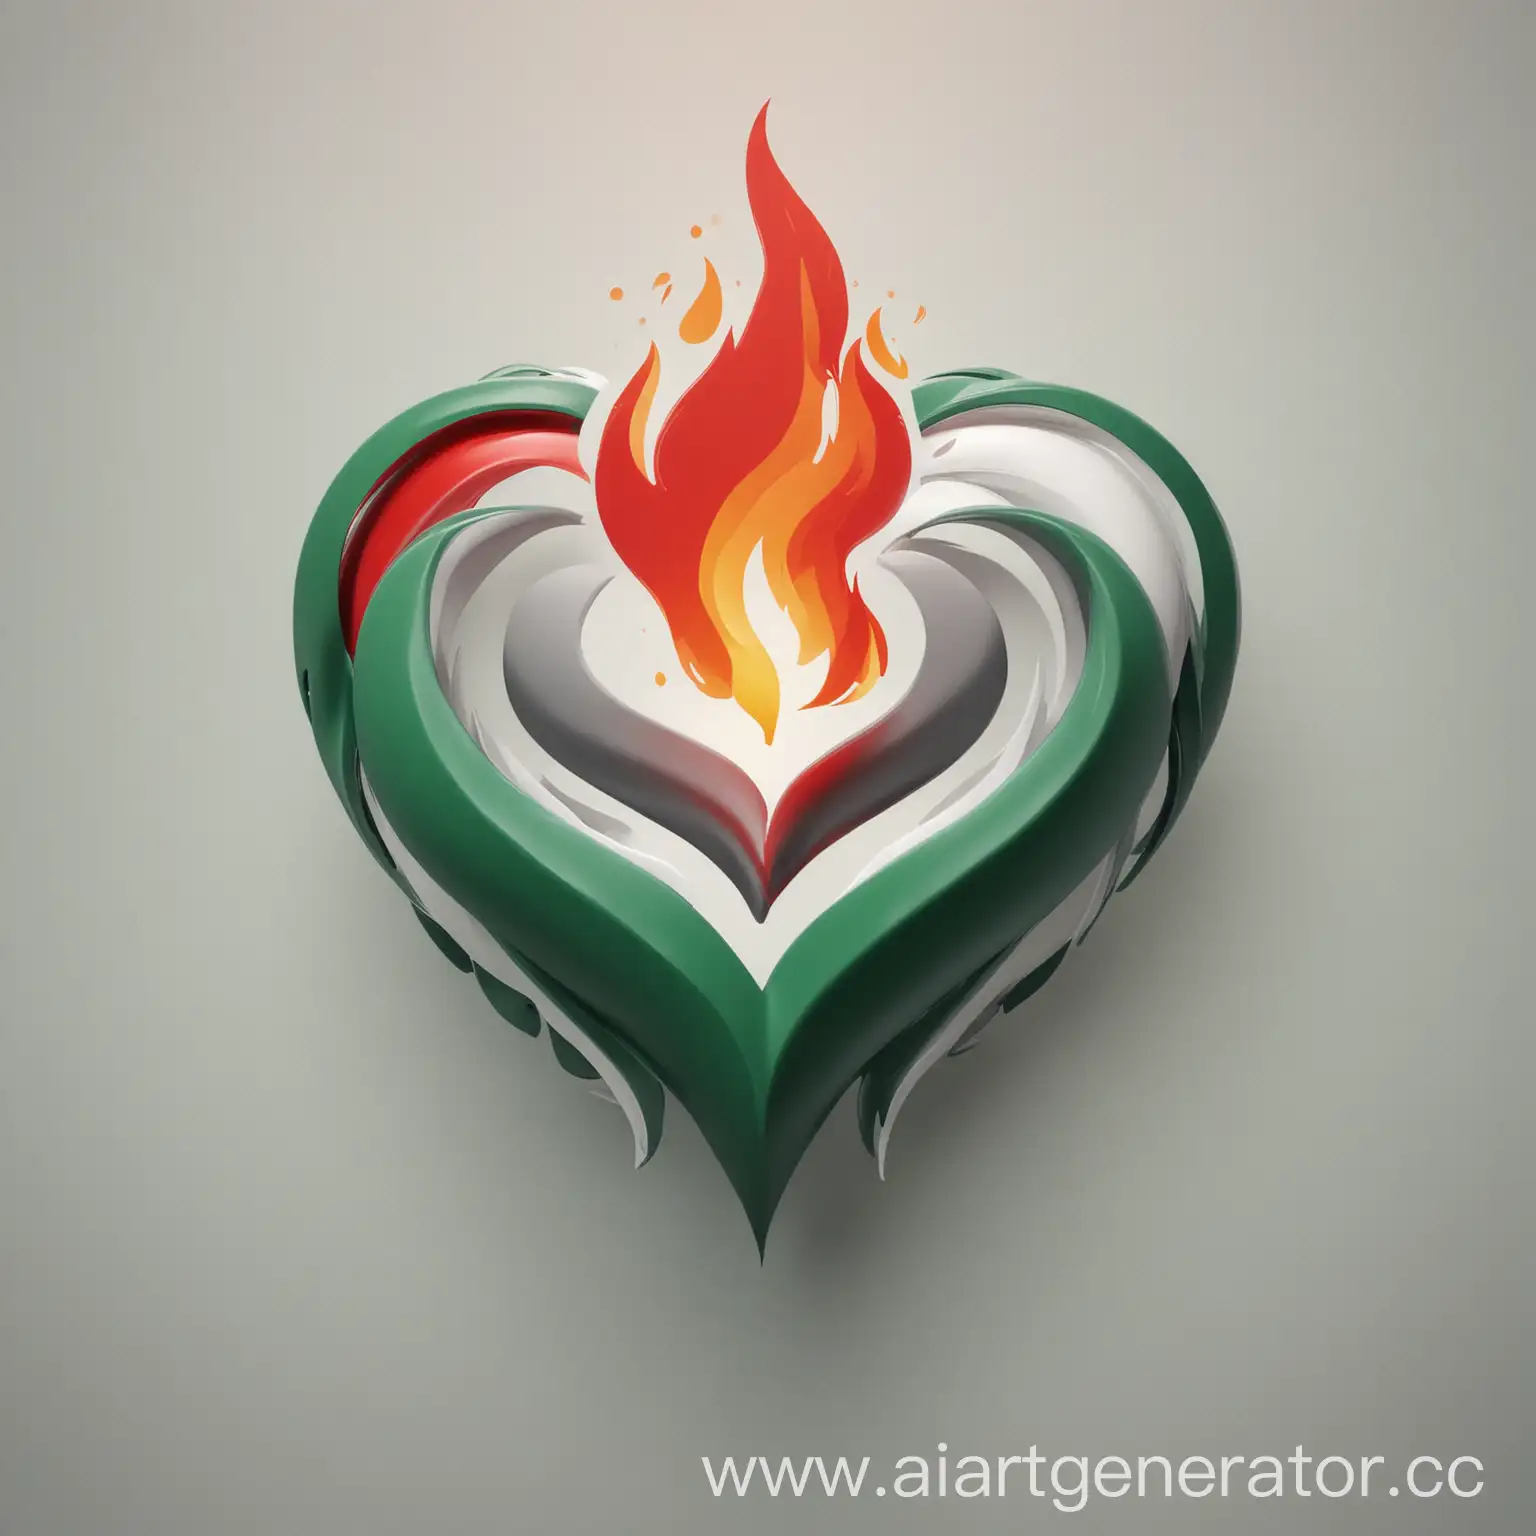 Streaming-Channel-Logo-with-Flame-Heart-in-Green-White-Gray-and-Red-Colors